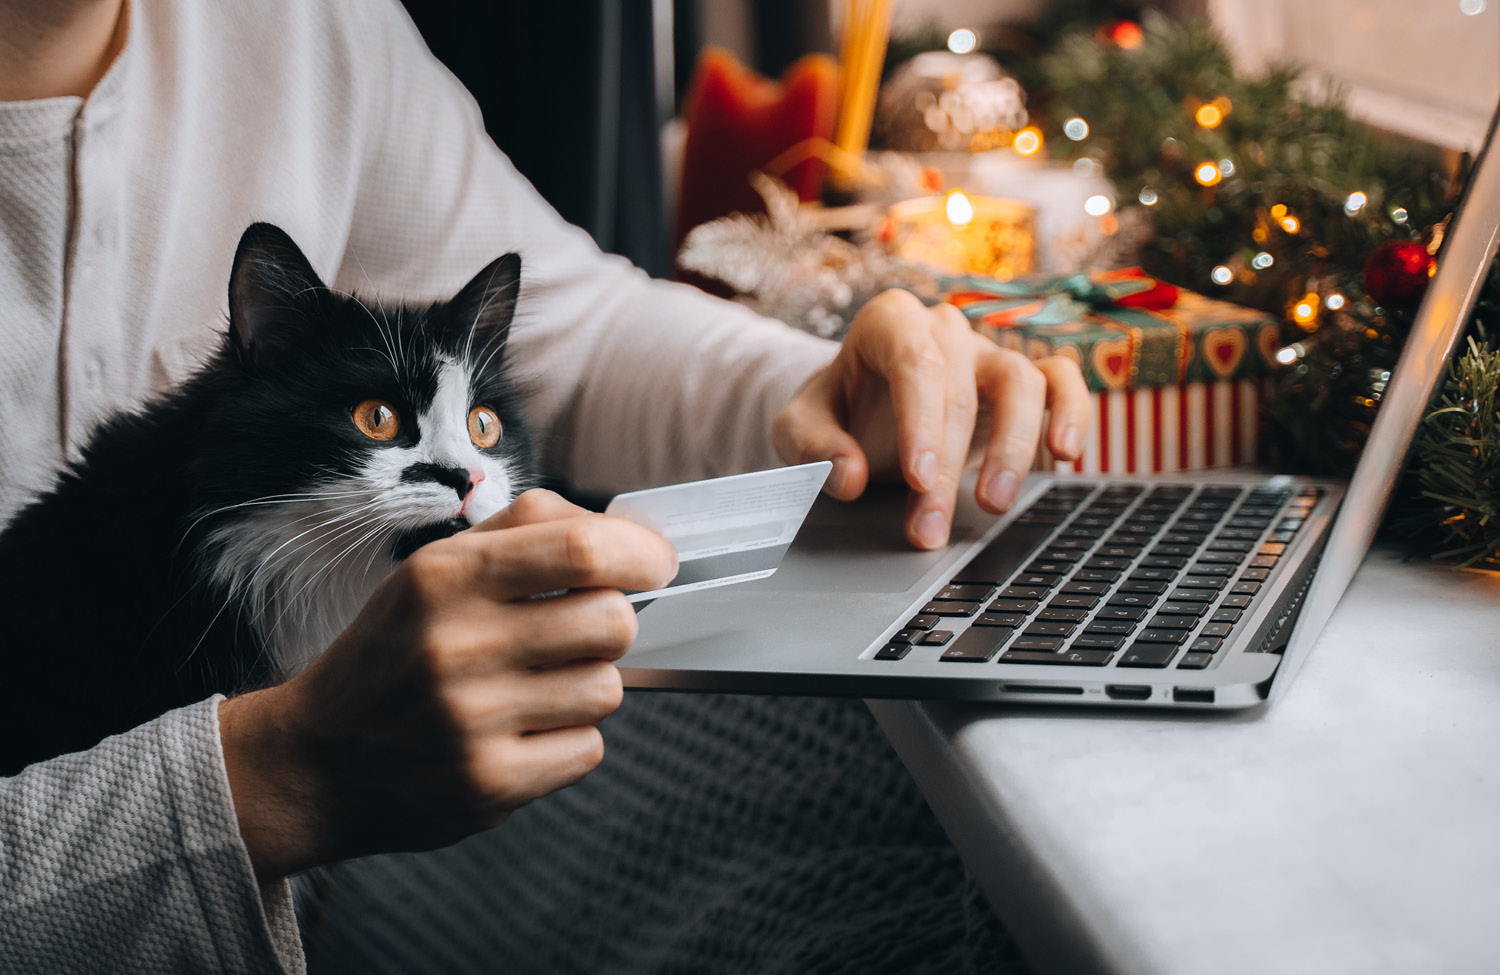 Protect Yourself While Online Shopping This Holiday Season